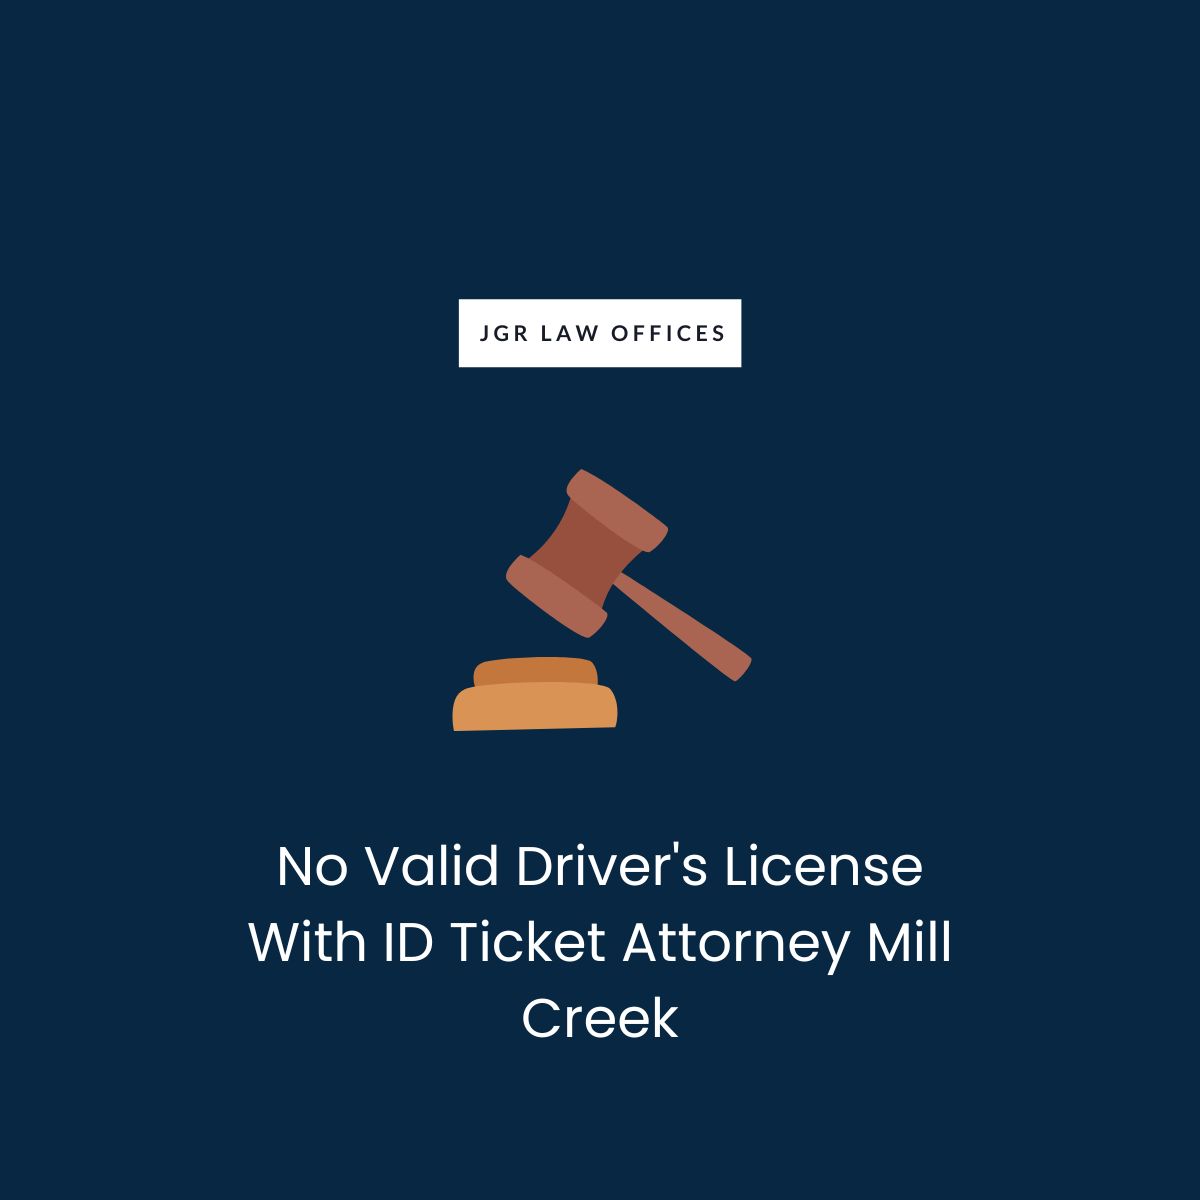 No Valid Driver's License With ID Ticket Attorney Mill Creek